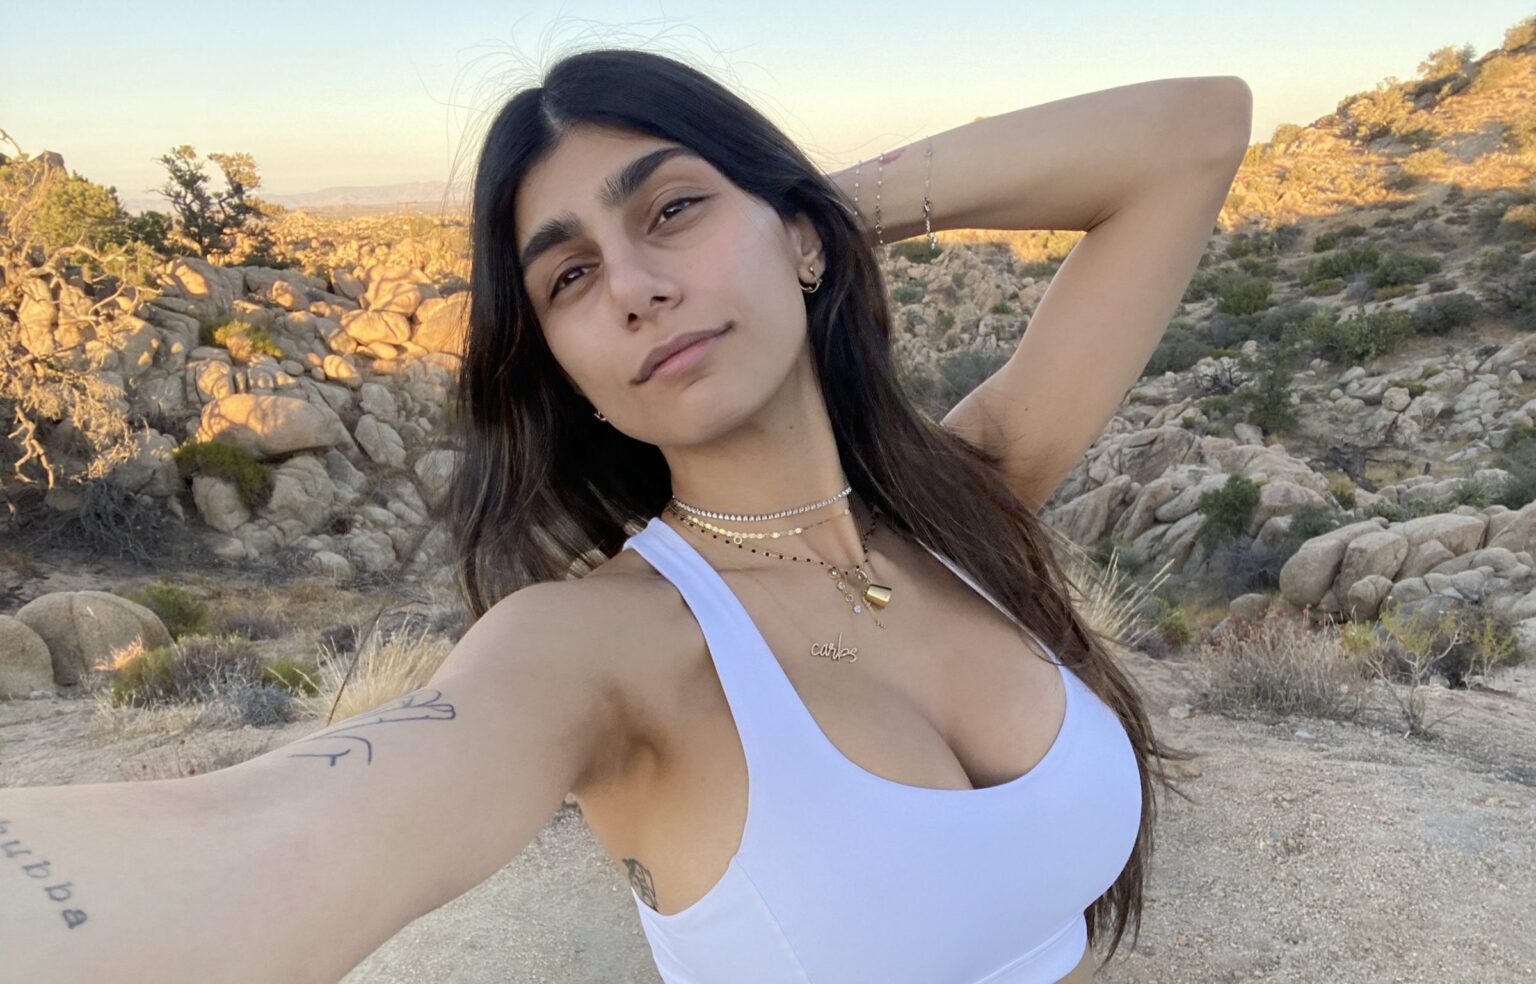 Life after PornHub for Mia Khalifa has been filled with its fair share of high points! What is the creator up to now?